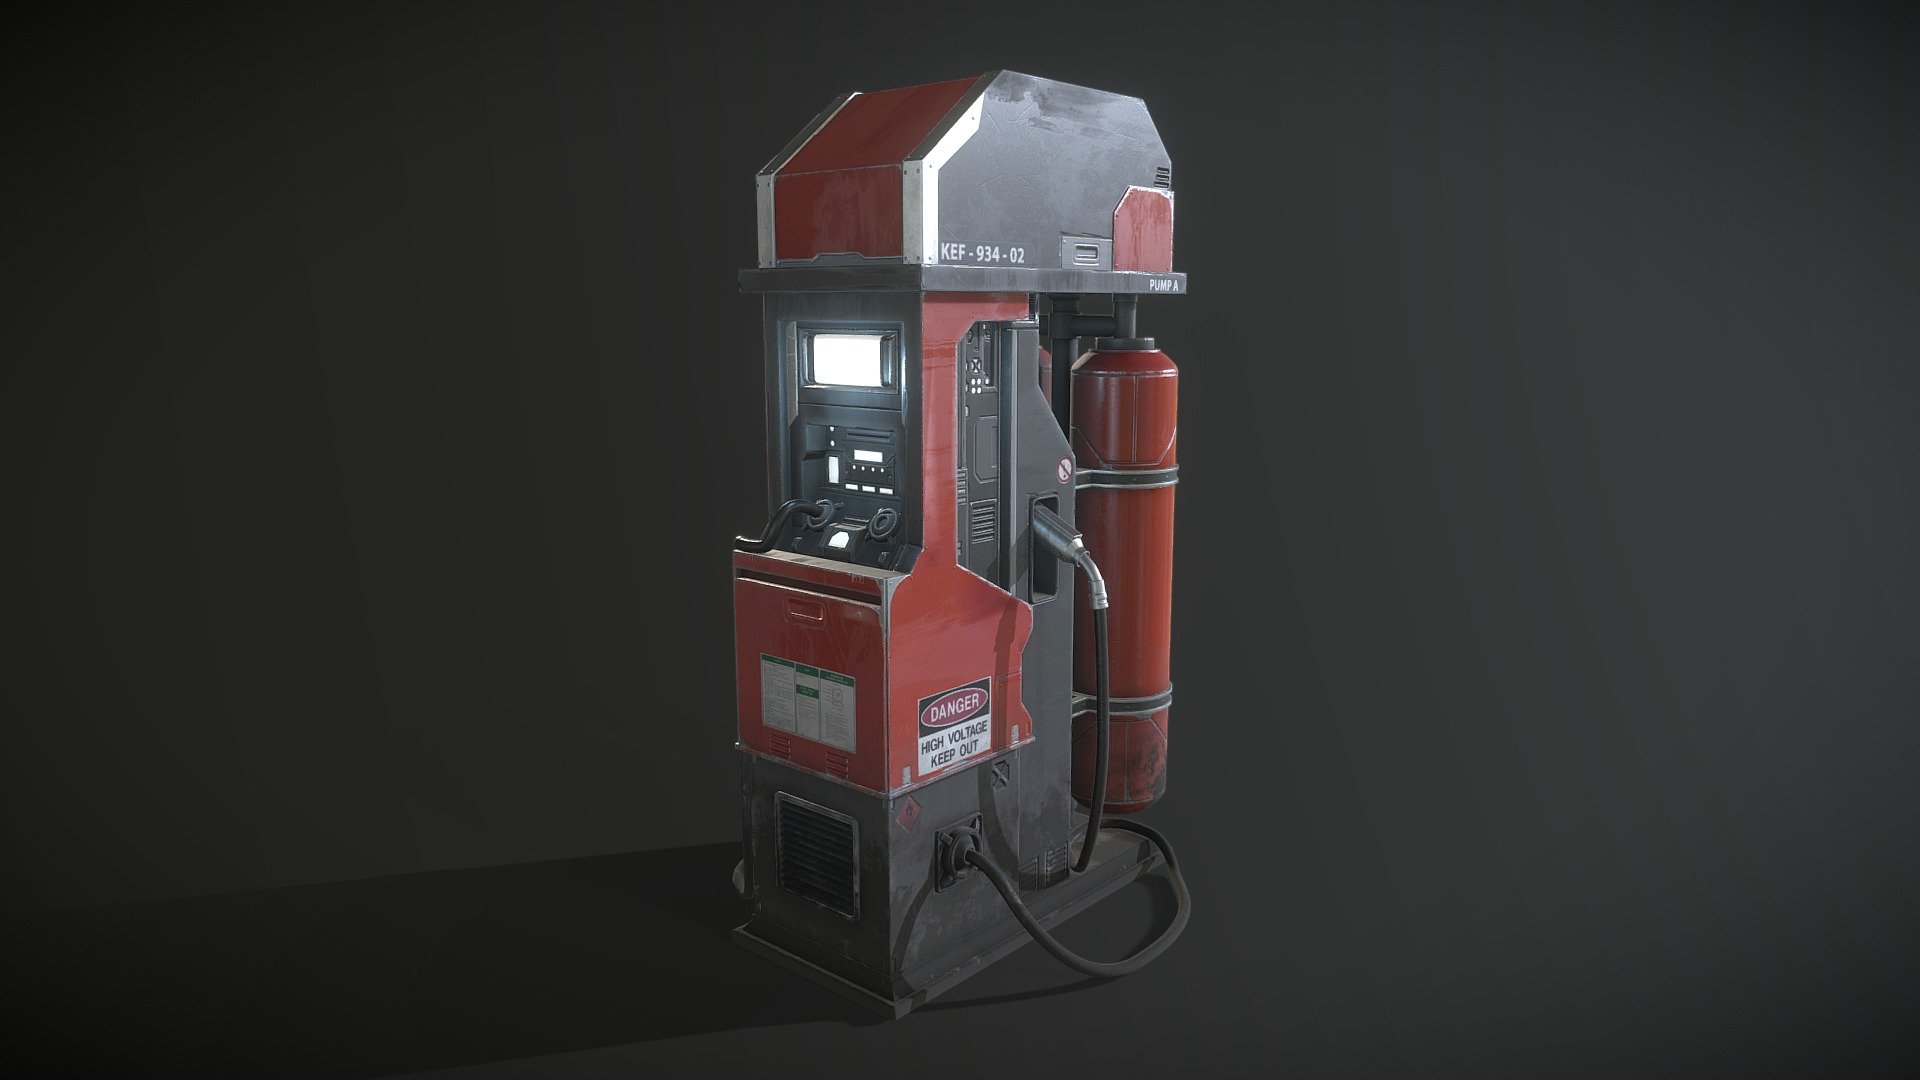 This is a Game Ready model of a Gas Pump I made while watching a course from Emiel Sleegers, a 3d environment artist at Ubisoft. For this piece, I followed the Game asset pipeline for AAA Games. I started by analizing the references, created a blockout, then a High Poly object. Then I turned it into a low poly object, uv unwraped, exported to Marmoset 3, where I baked the high poly onto the low poly mesh by using the weighted normals technique. Then I set the render scene, and exported my baked textures to Substance Painter, where I painted the textures. FInally, I imported the textures from substance into Marmoset 3, and set my render scene with a Turntable render.
I was able to learn and to improve knowledge I already had, with some new tools and techniques taugh by Emiel. Hope you like it! - Futuristic Gas Pump - 3D model by Gustavo Olaio (@olaio3d) 3d model